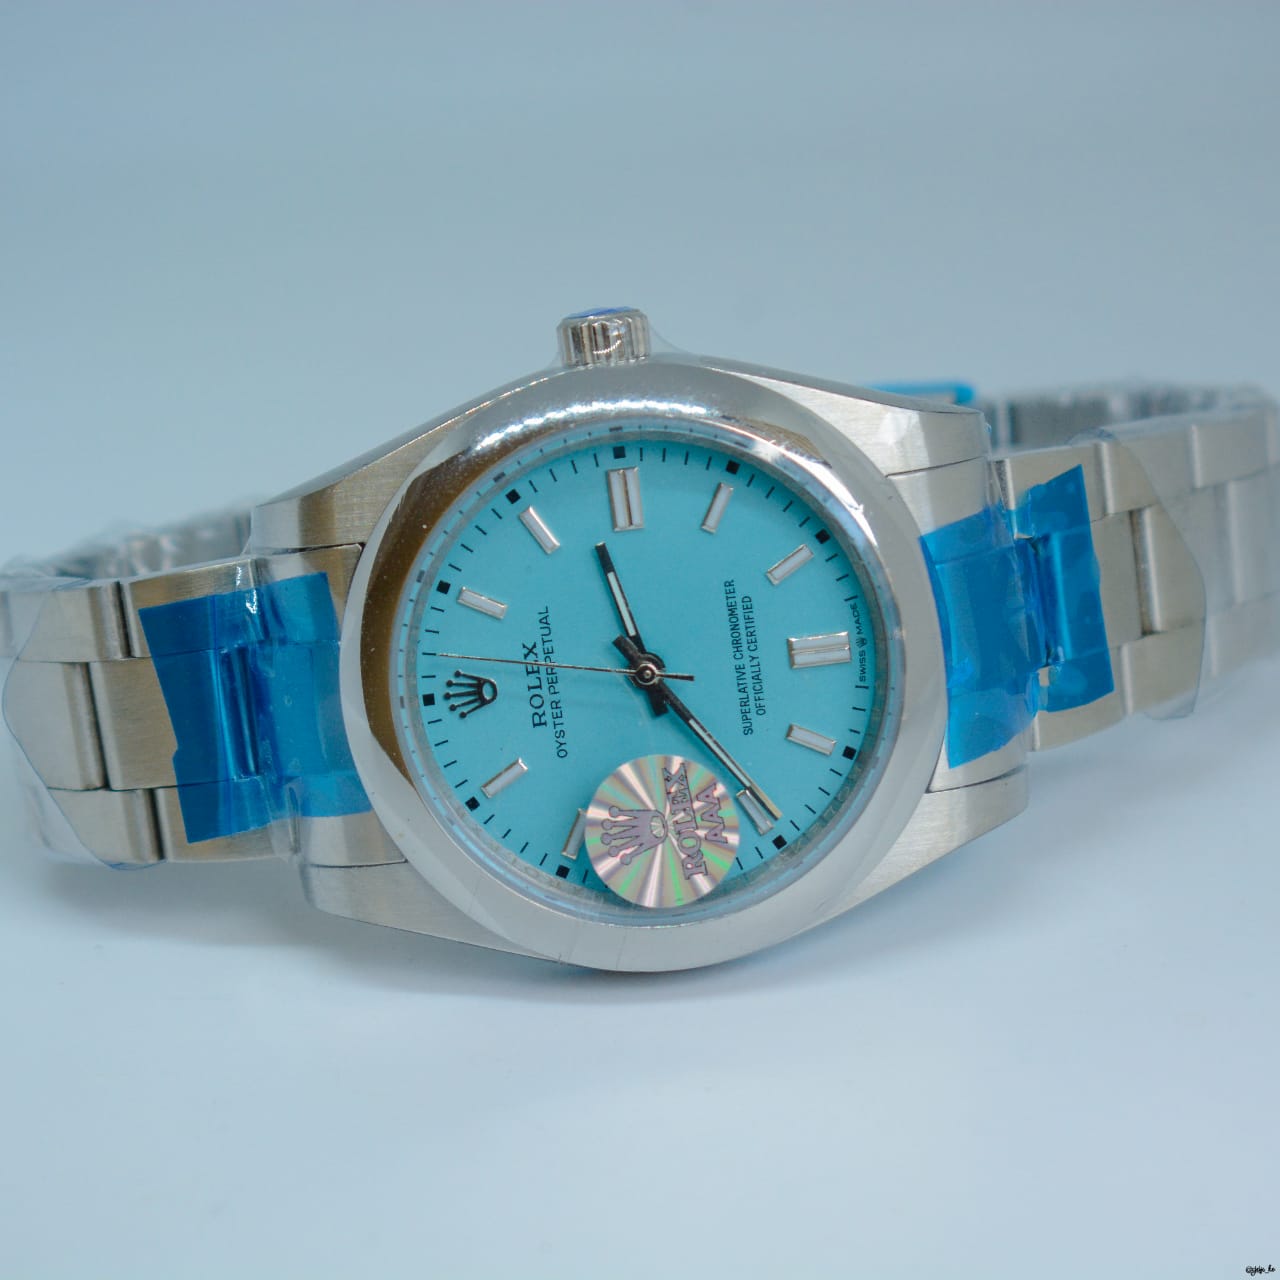 Rolex Oyster Perpetual 41 mm oyster steel Watch for sale in Nairobi Kenya.